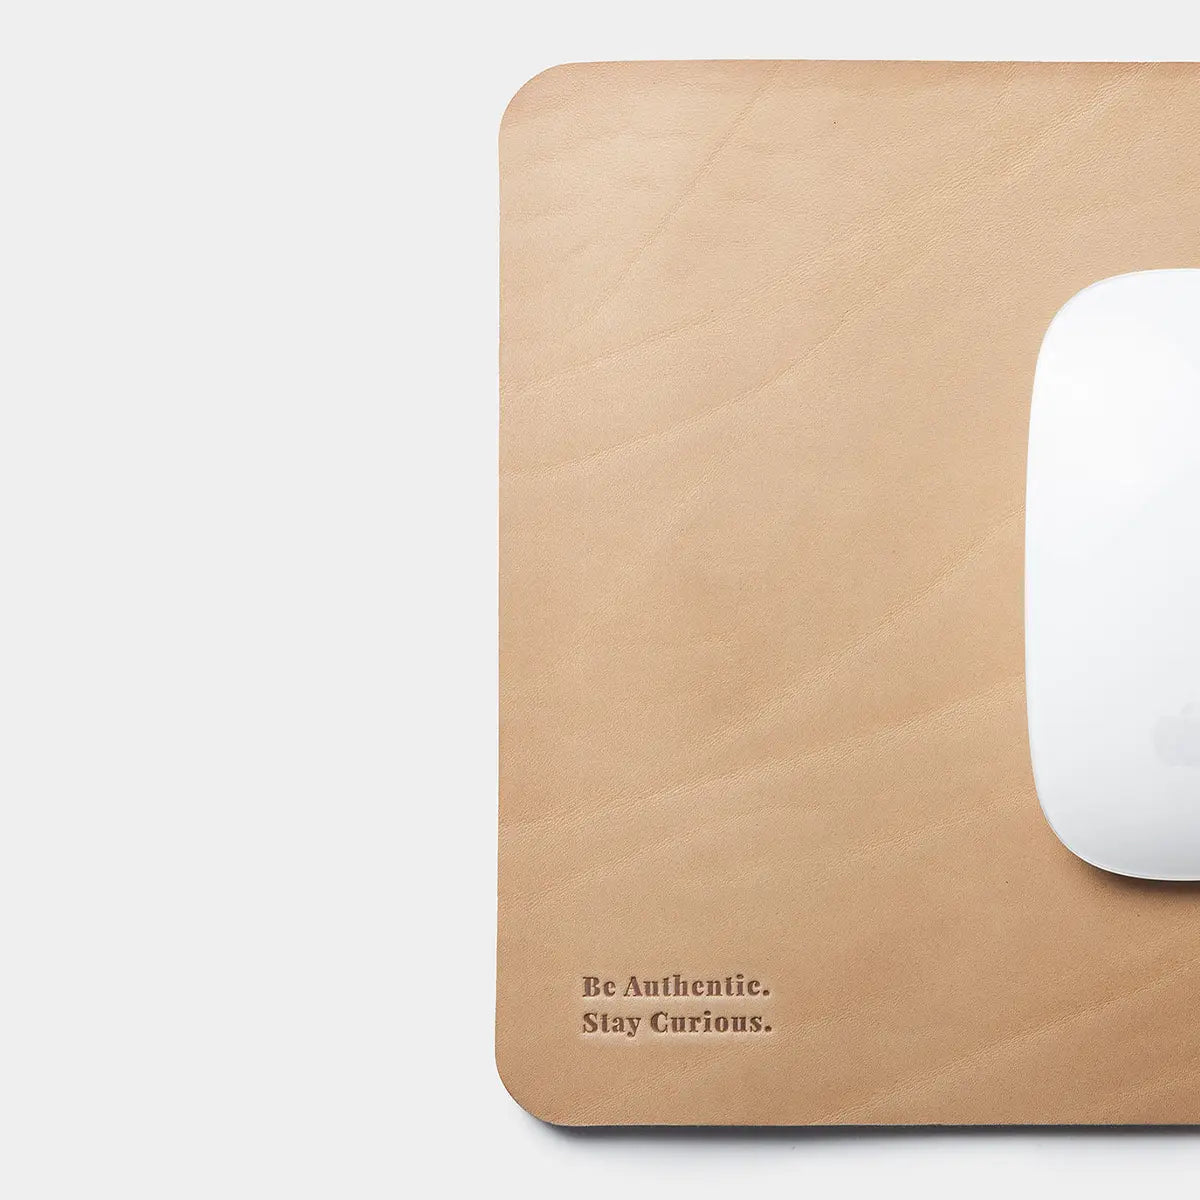 Leather Mouse Pad - Natural